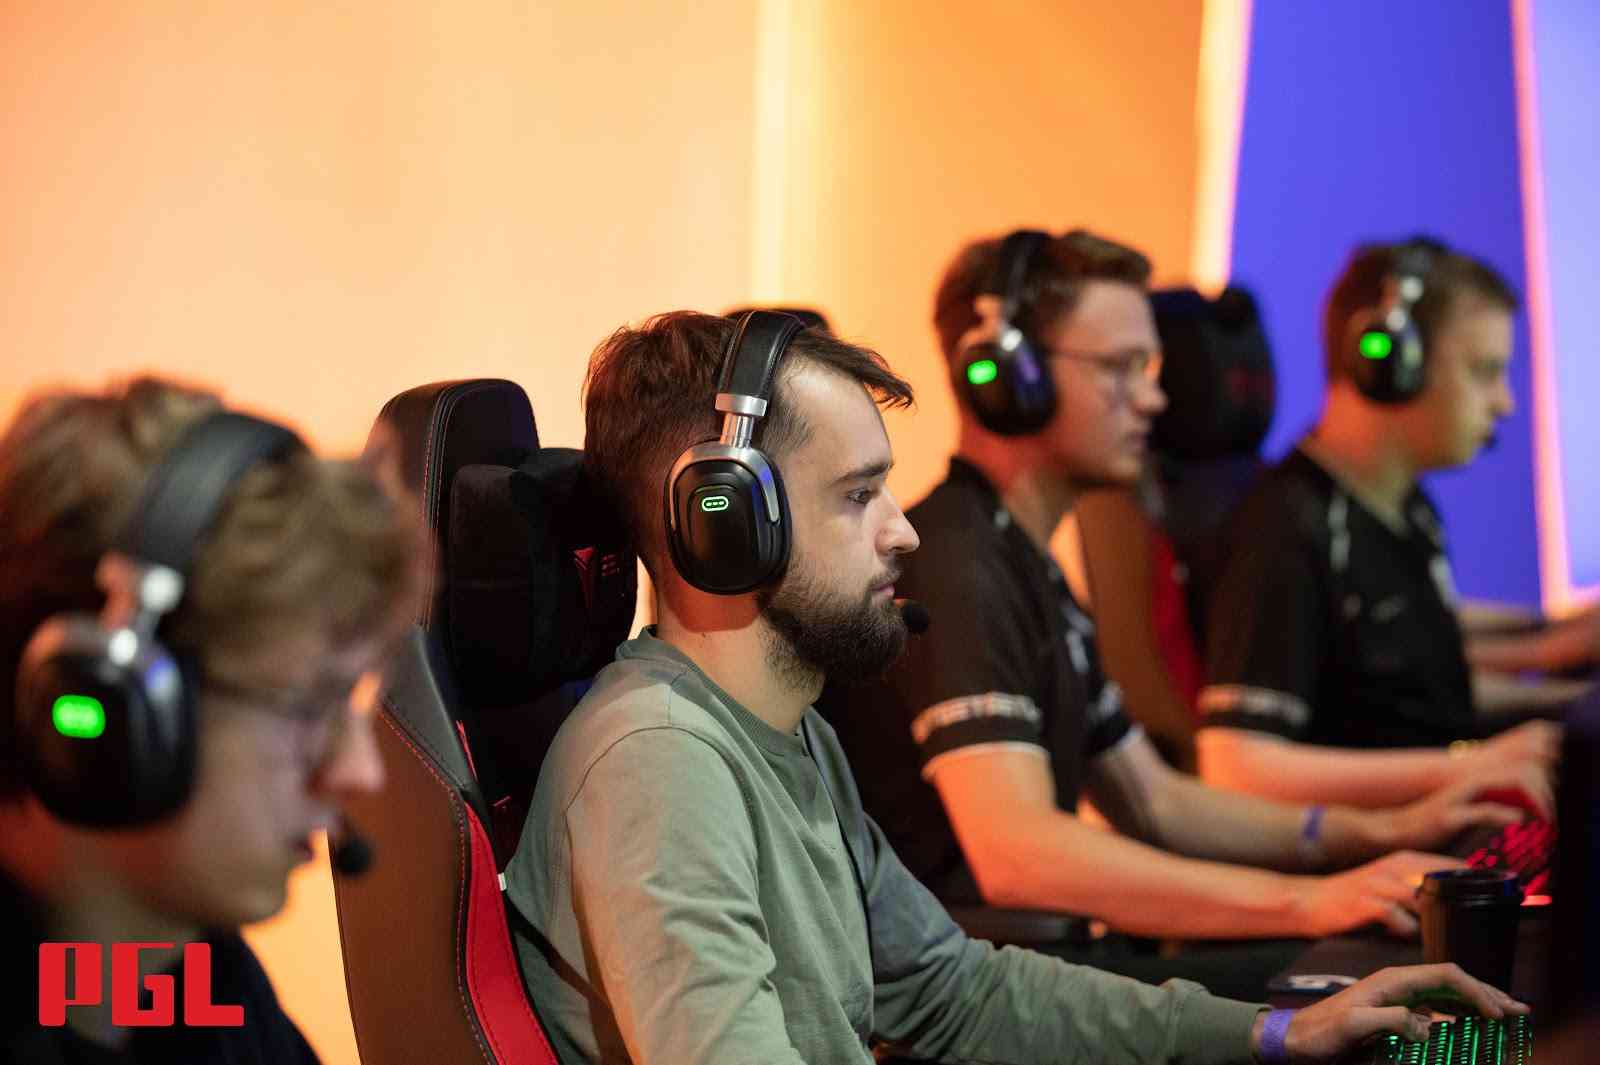 The roster for Entity compete in a game of Dota 2 during the PGL Arlington Major